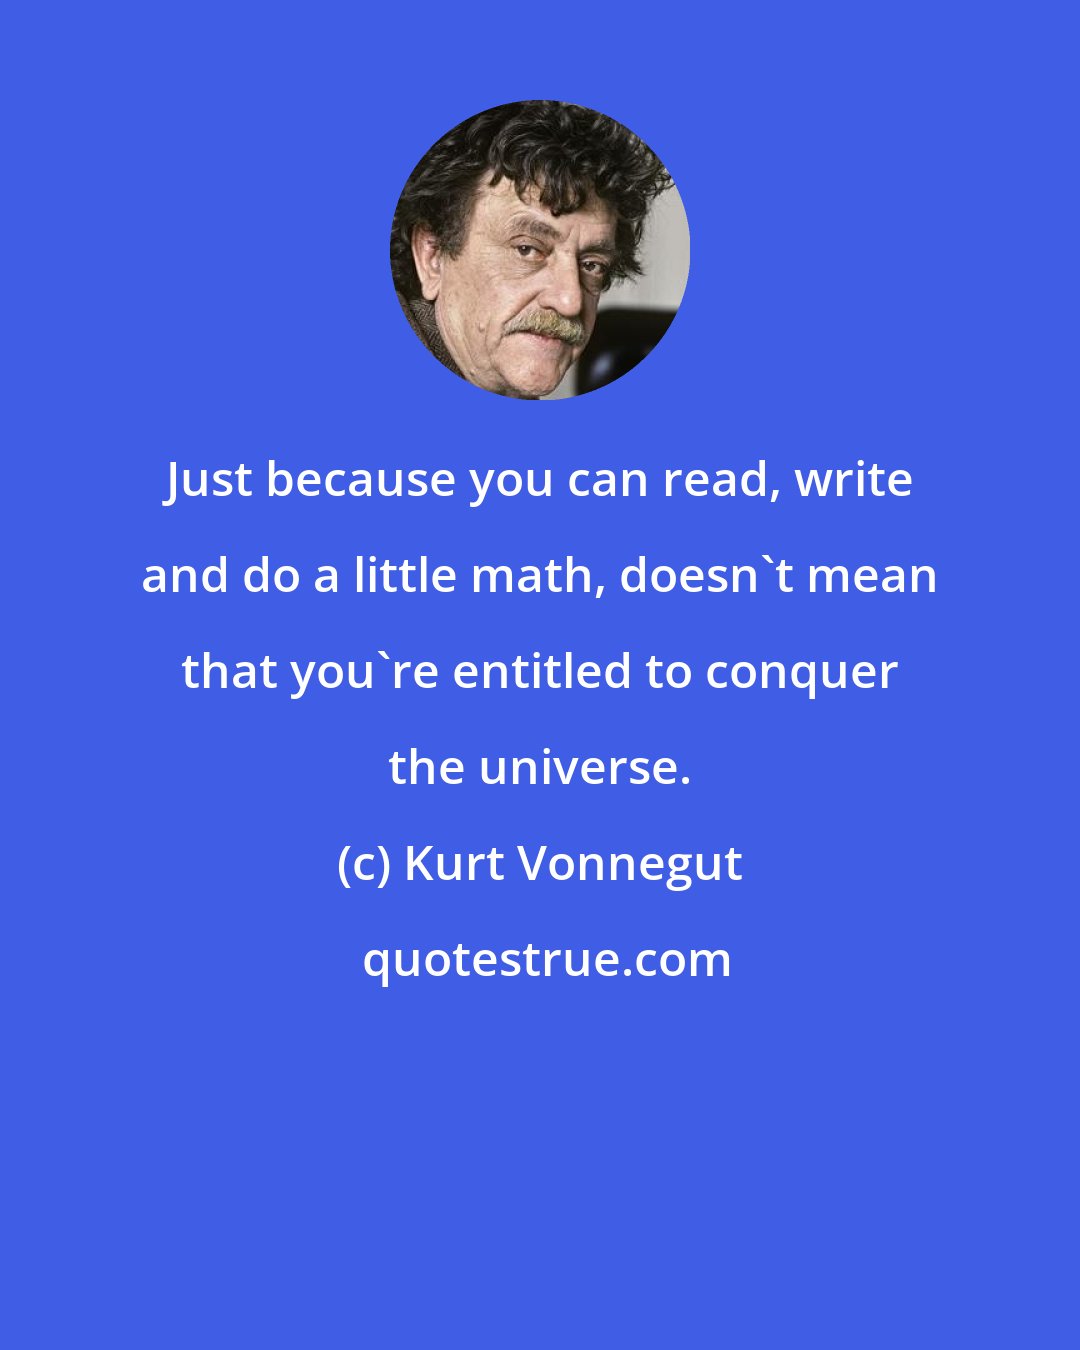 Kurt Vonnegut: Just because you can read, write and do a little math, doesn't mean that you're entitled to conquer the universe.